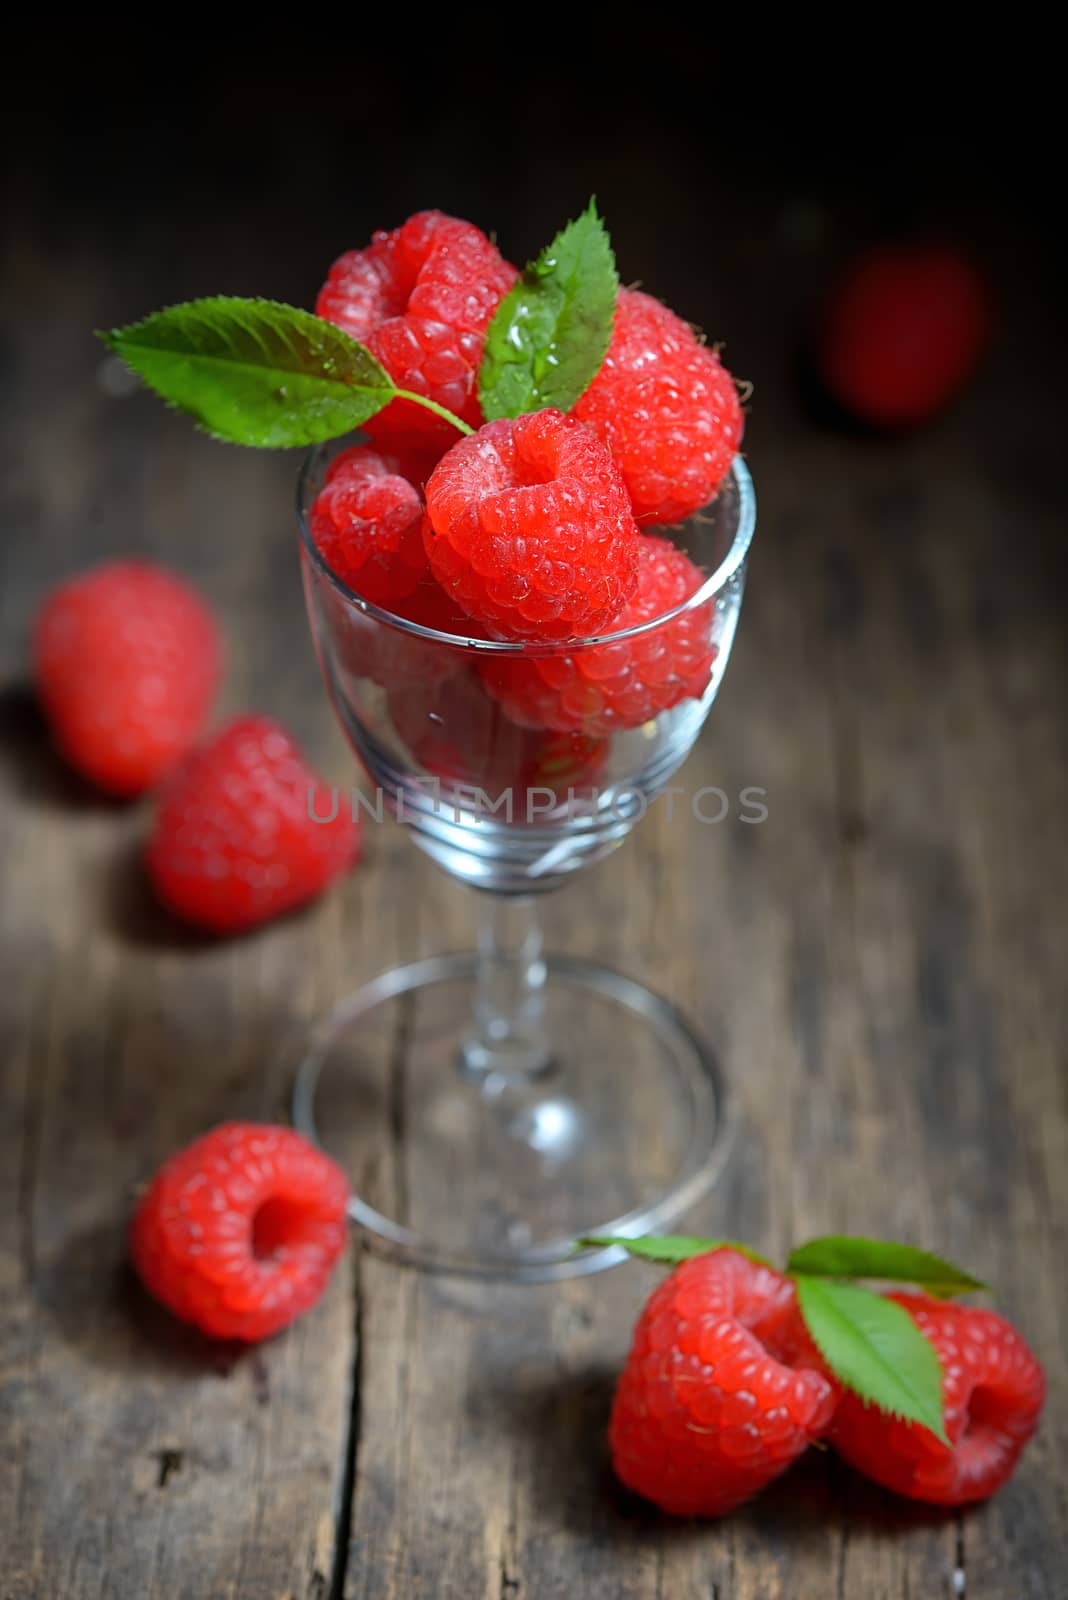 Raspberries in small glass by mady70